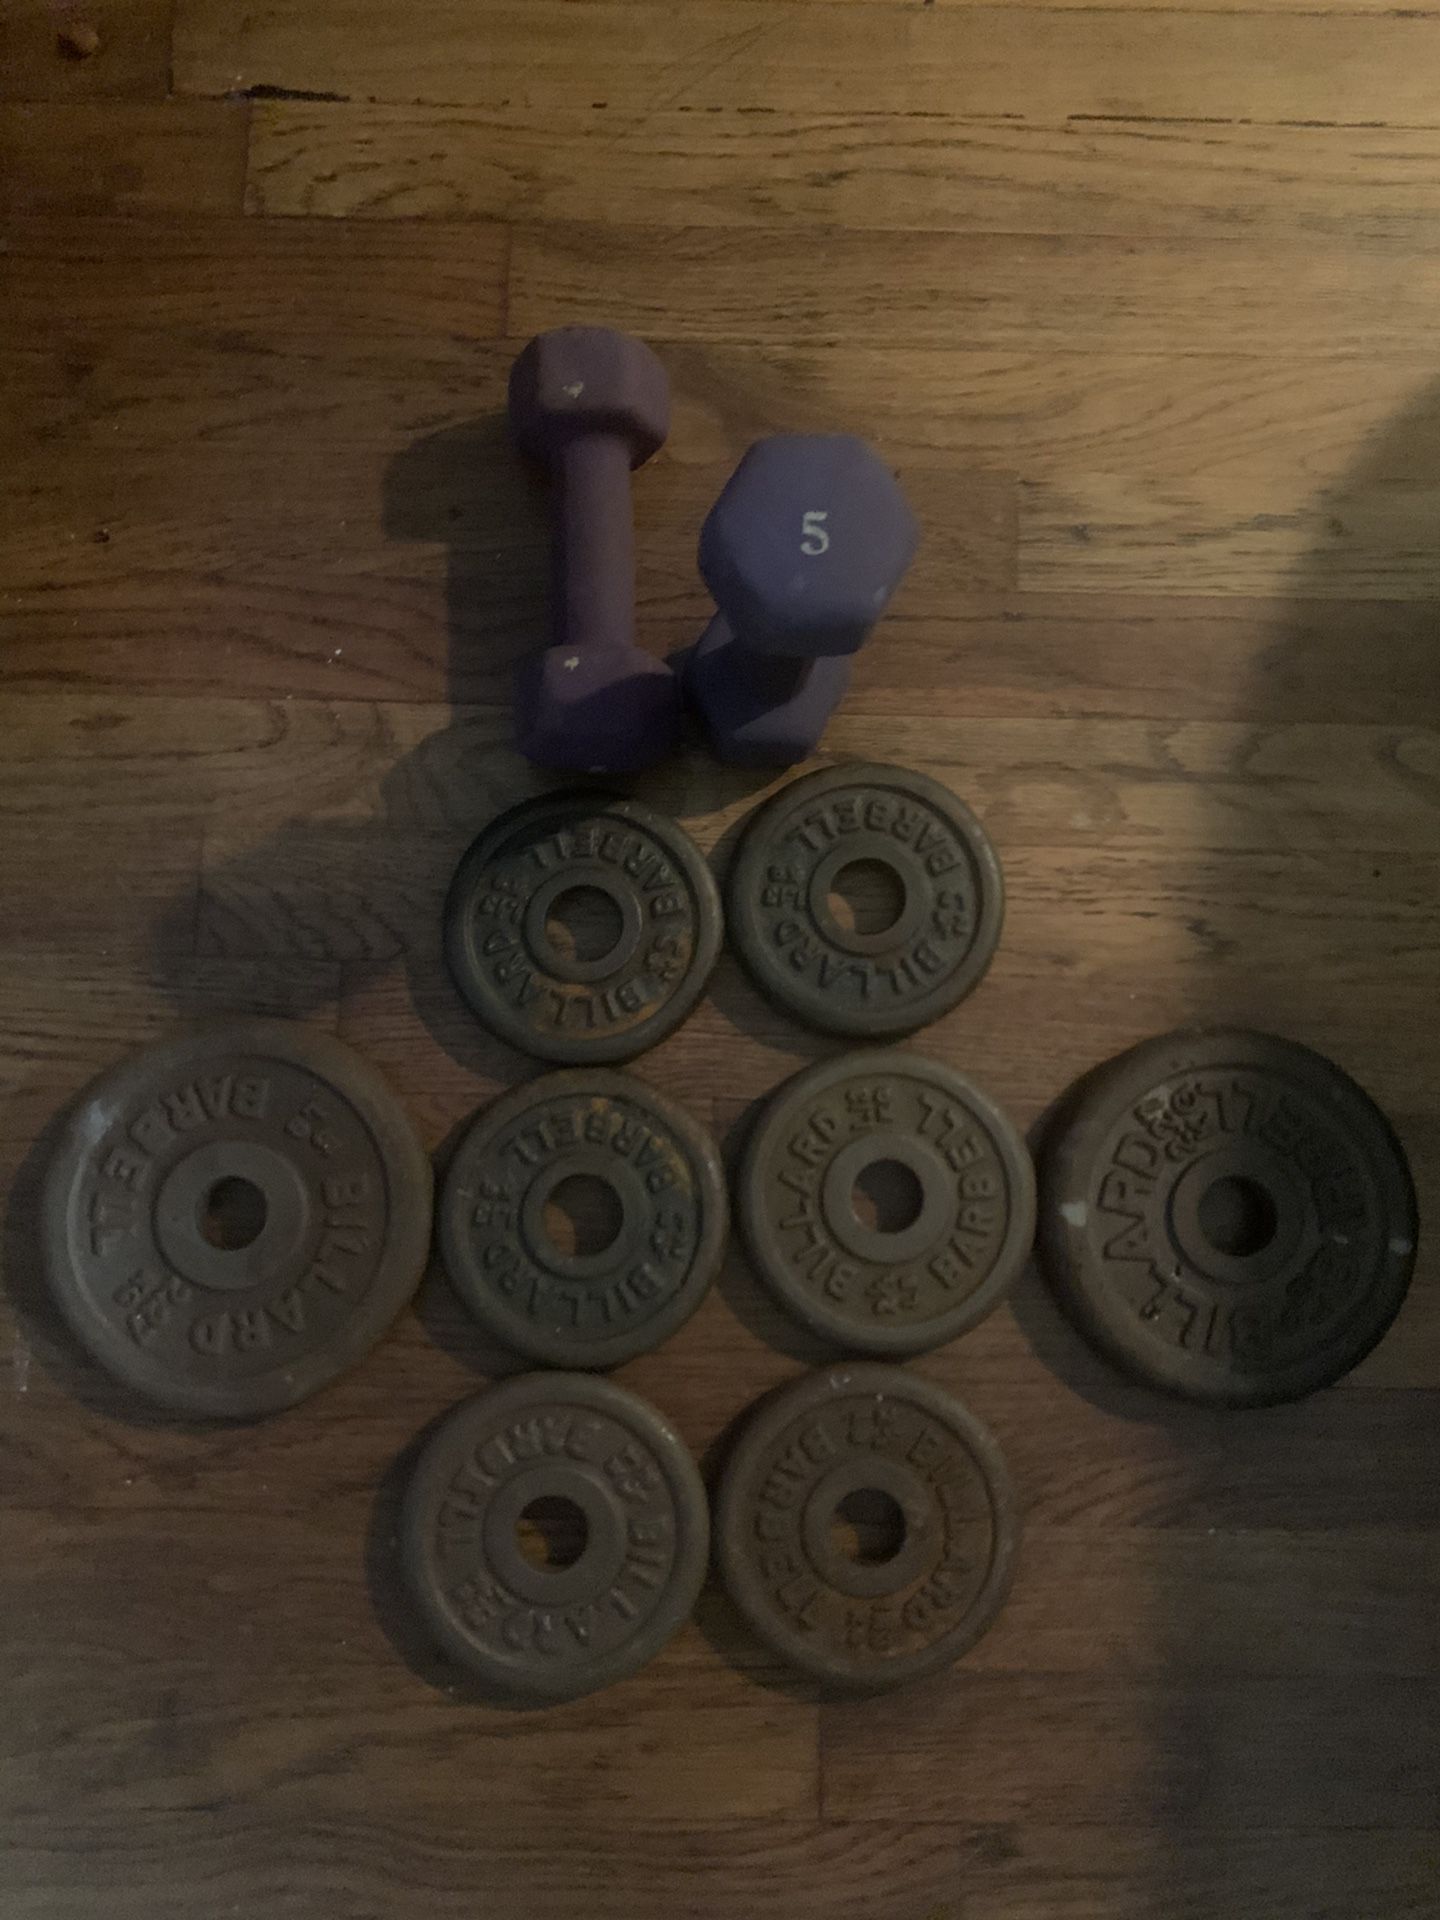 35 pounds of weight total. Six 2.5 and two 5 standard 1 inch plates and a paid of dumbbells